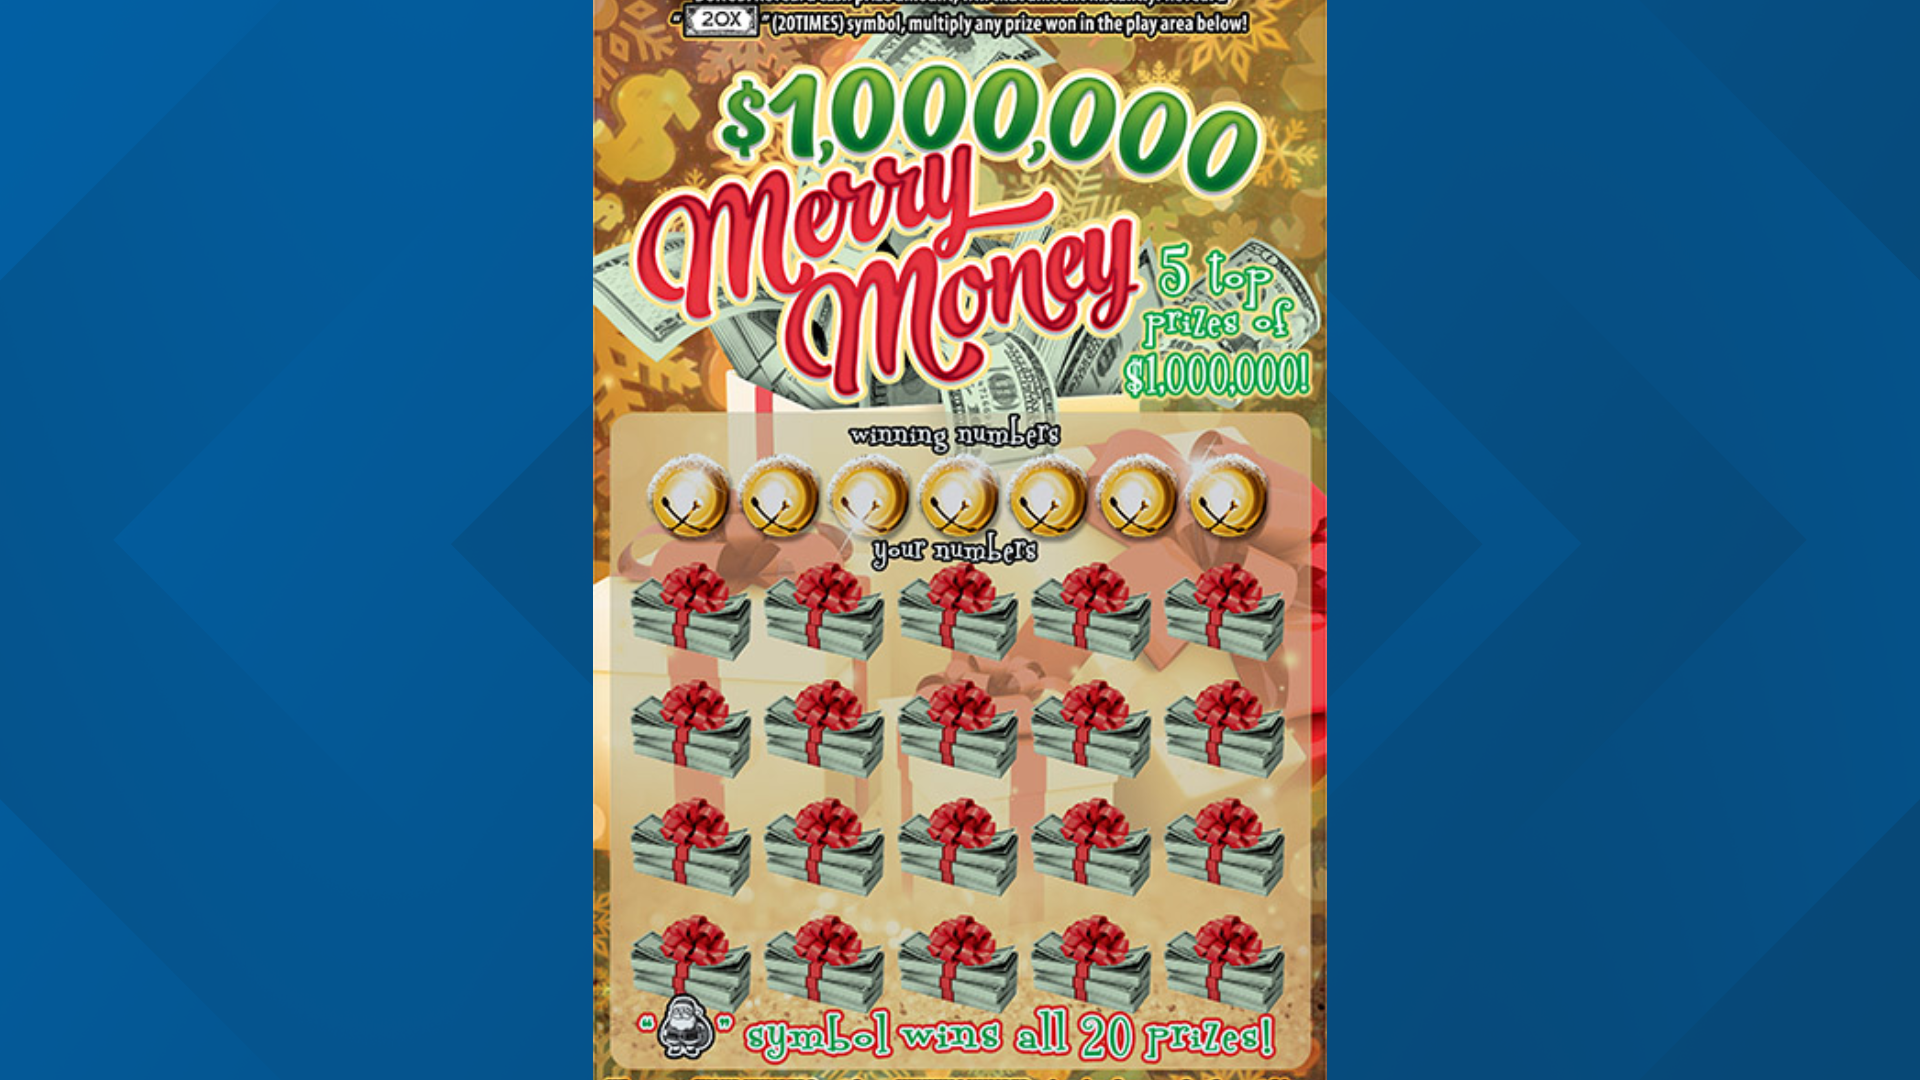 The winner hit the jackpot with a $1,000,000 Merry Money Scratch-Off ticket.